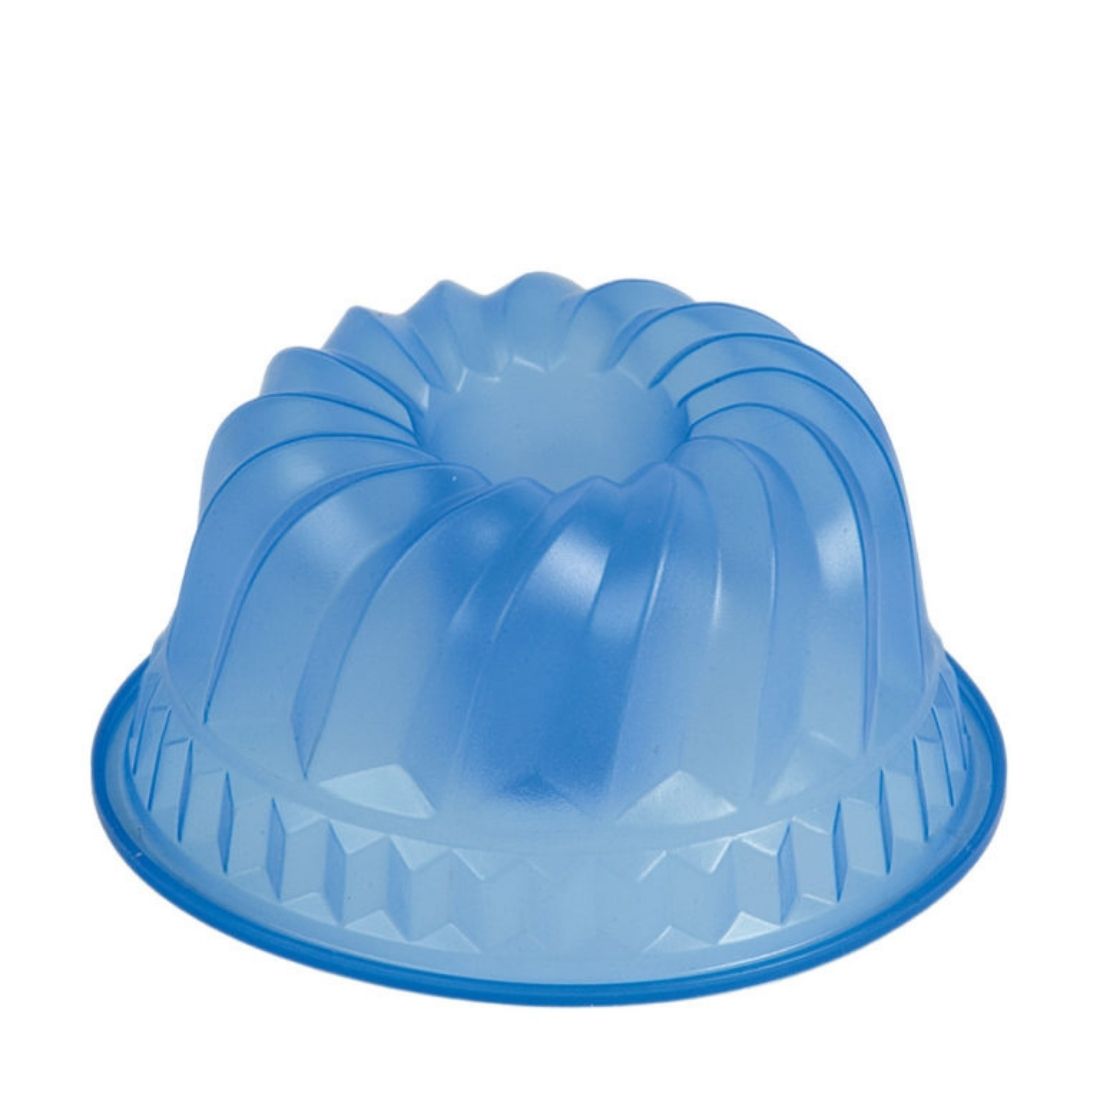 Gugelhupf Silicone Cake / Jelly Mold - Pavoni (200 x 95 mm)